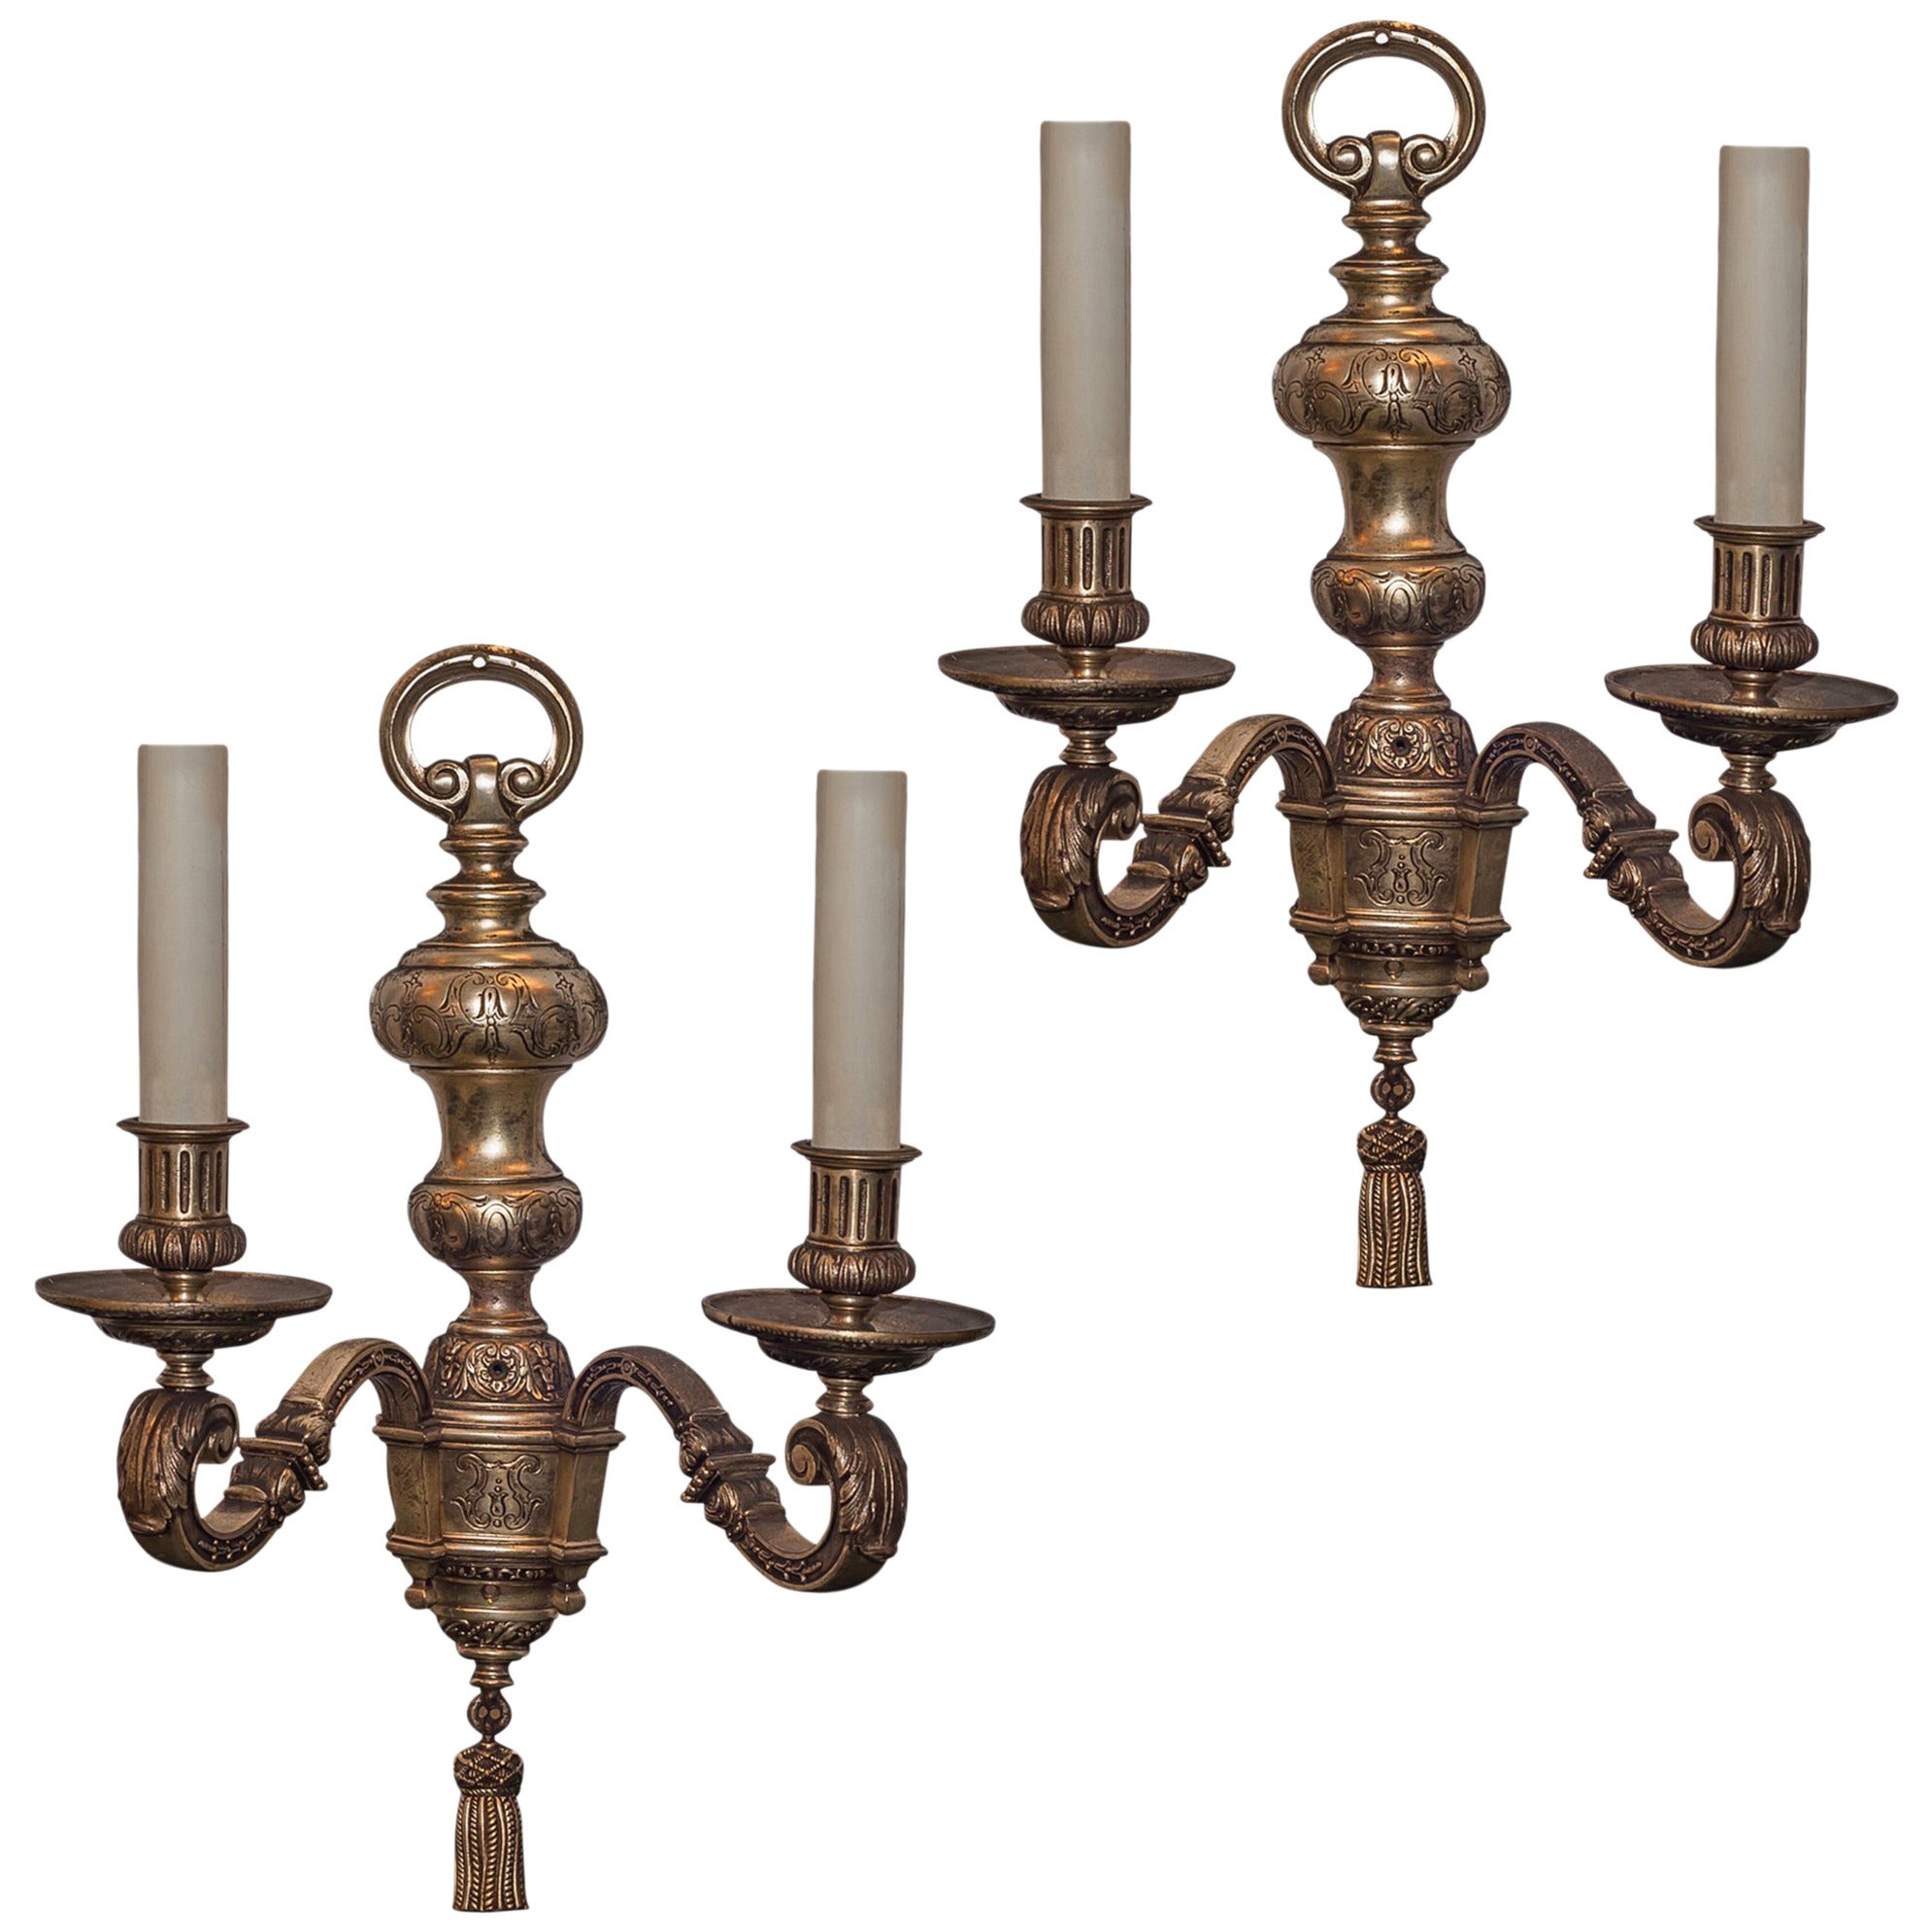 Pair of Silvered Metal Two-Arm Wall Light Sconces Attributed to Caldwell & Co